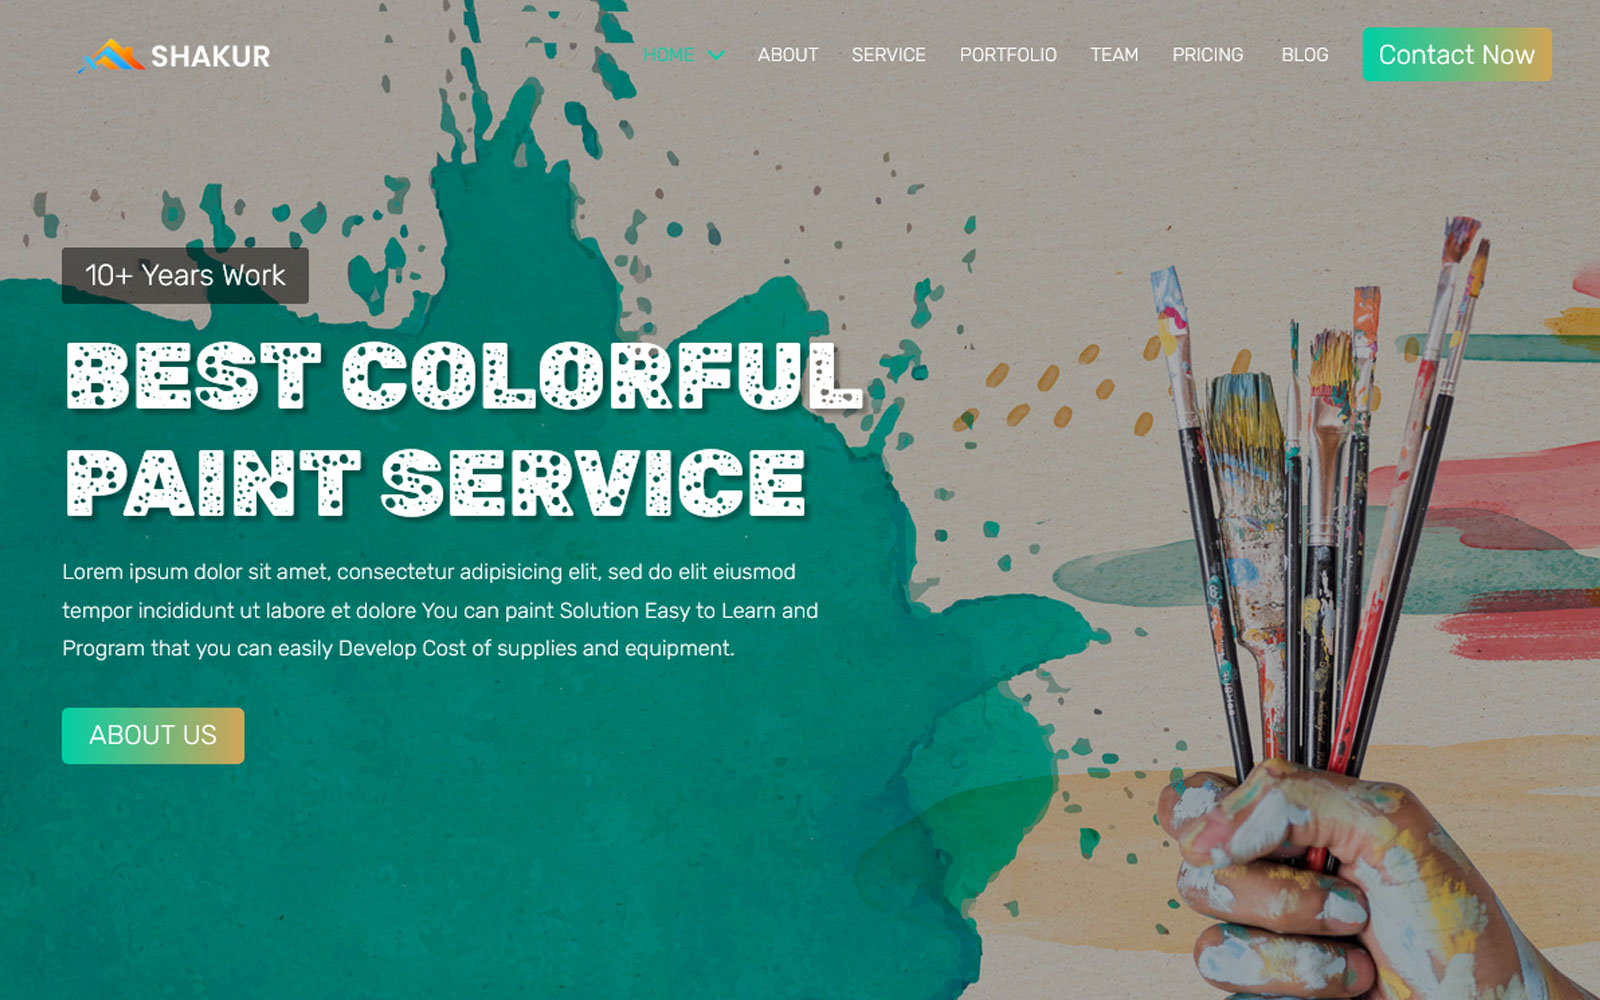 Shakur - Painting Service Company Landing Page Template